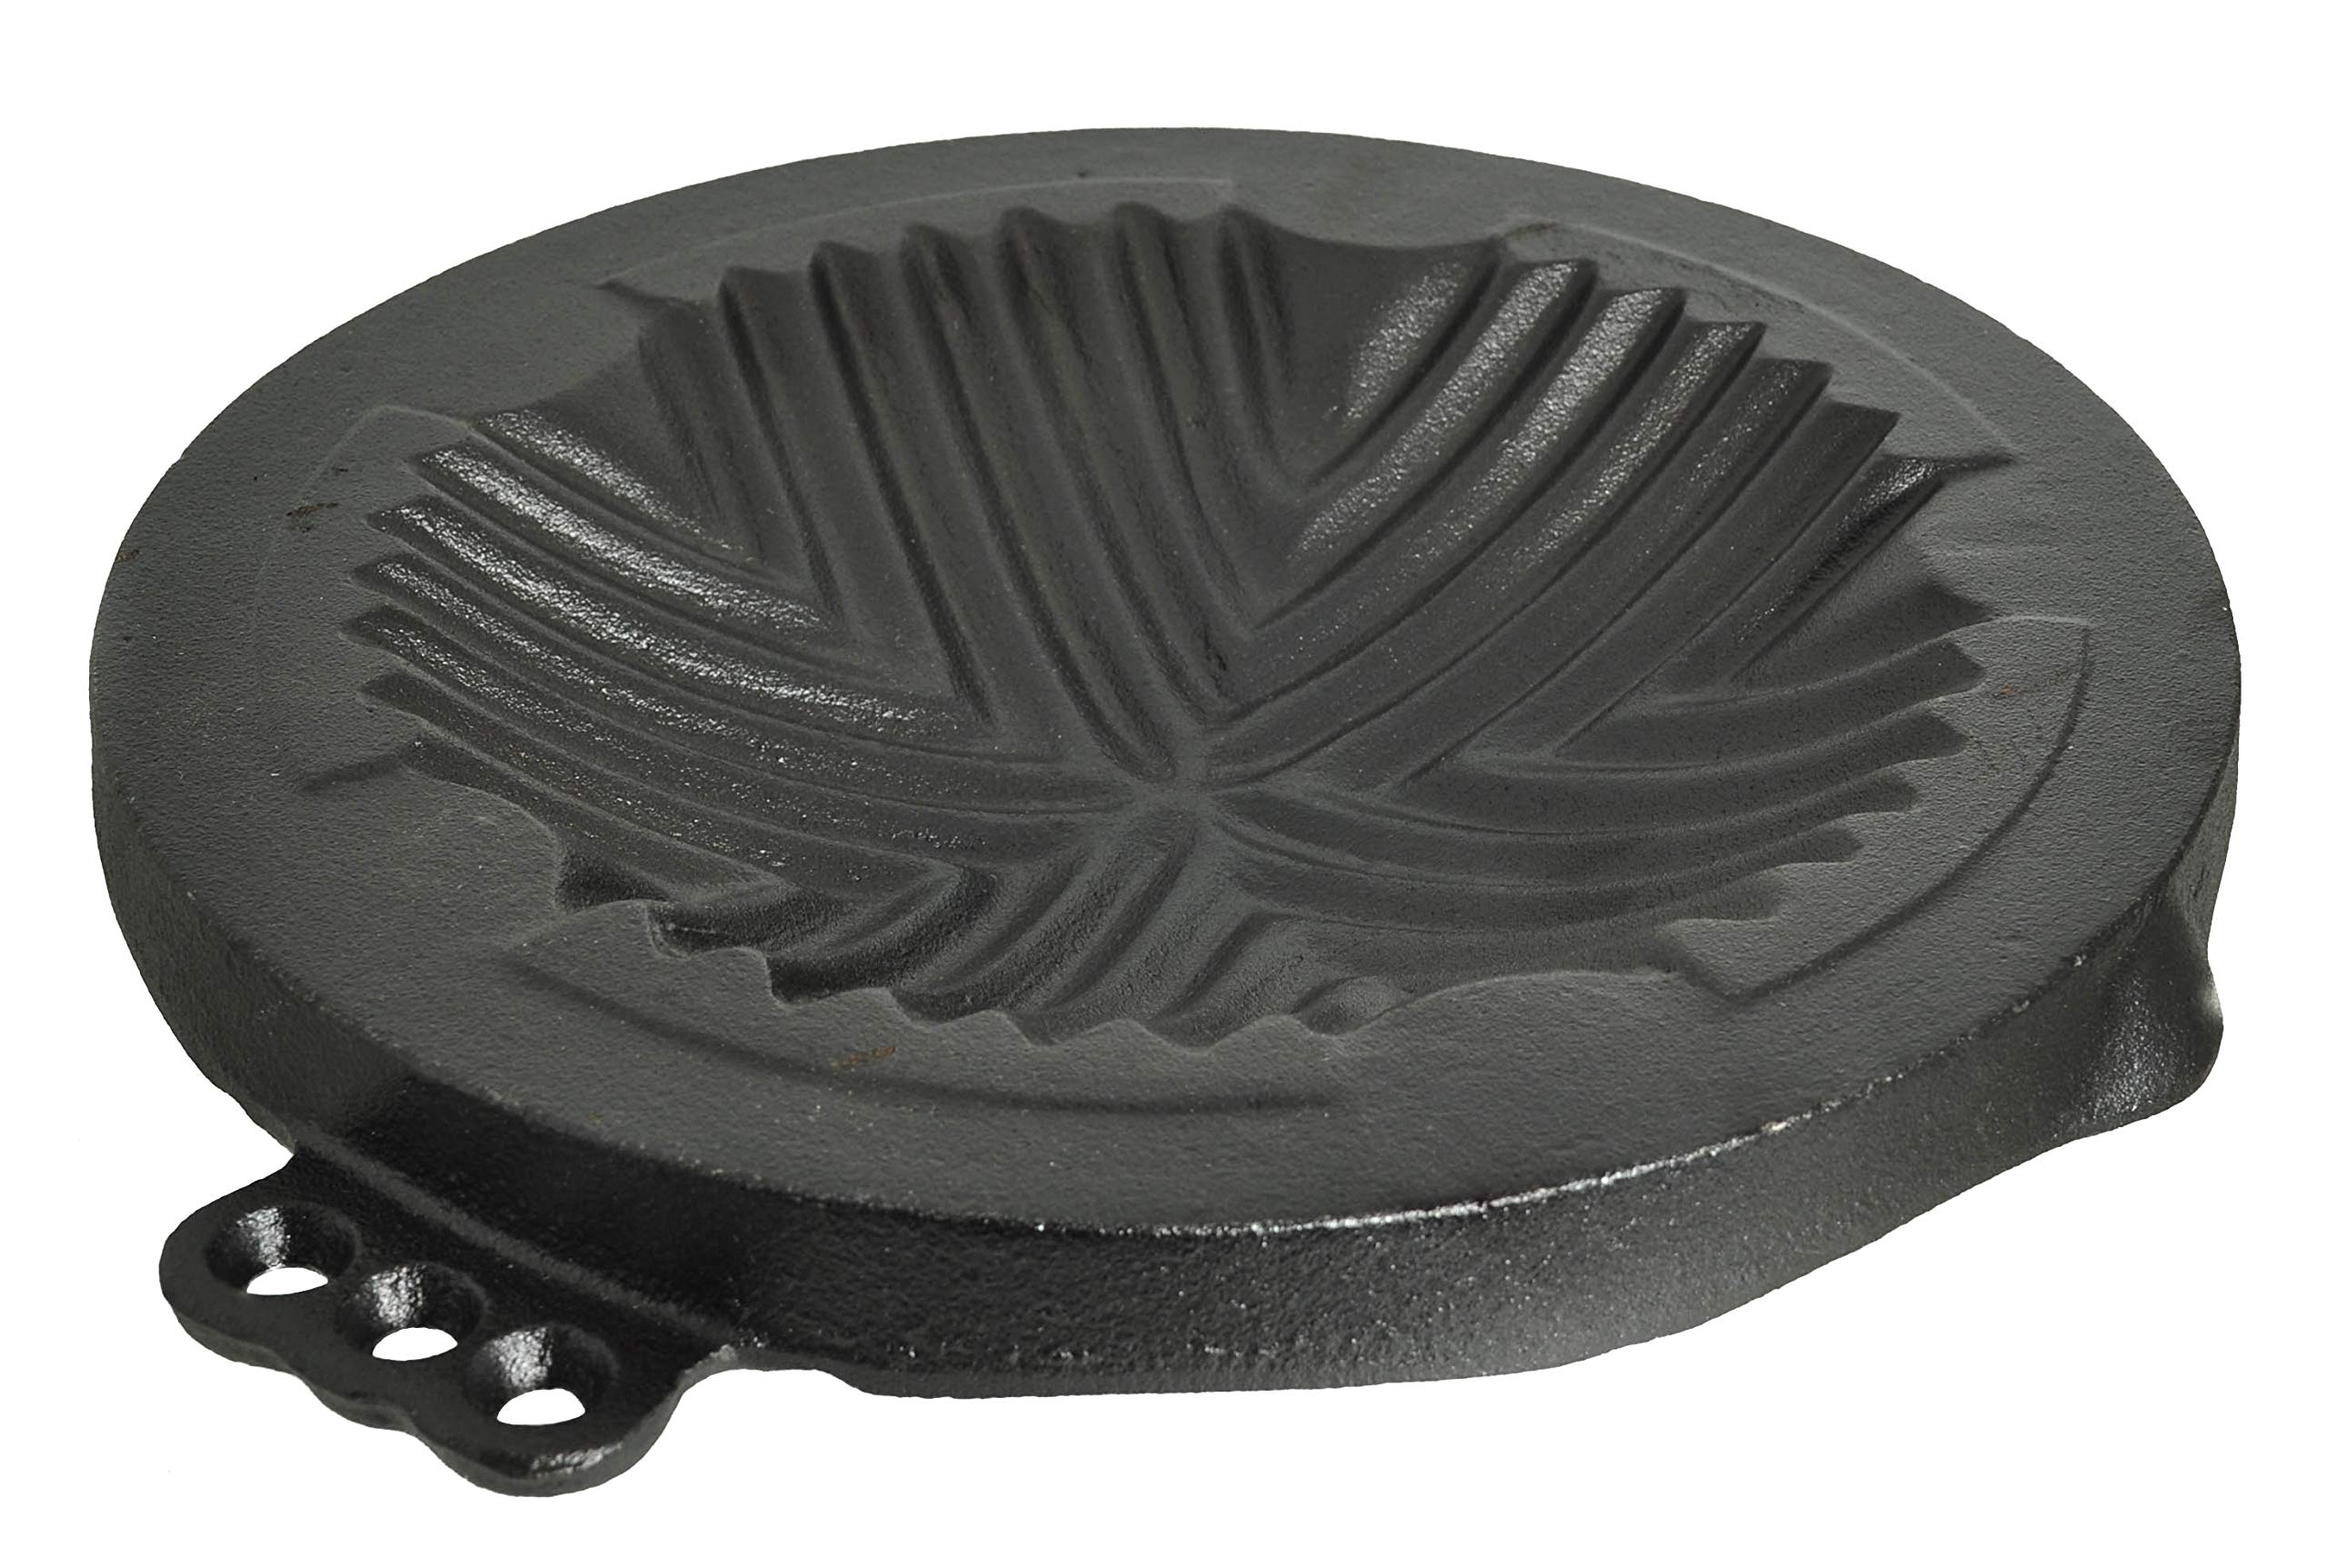 Korean Traditional Cast Iron Mongolian BBQ Grill Pan Stovetop, 11-1/2 Inches x 2 Inches (29cm)